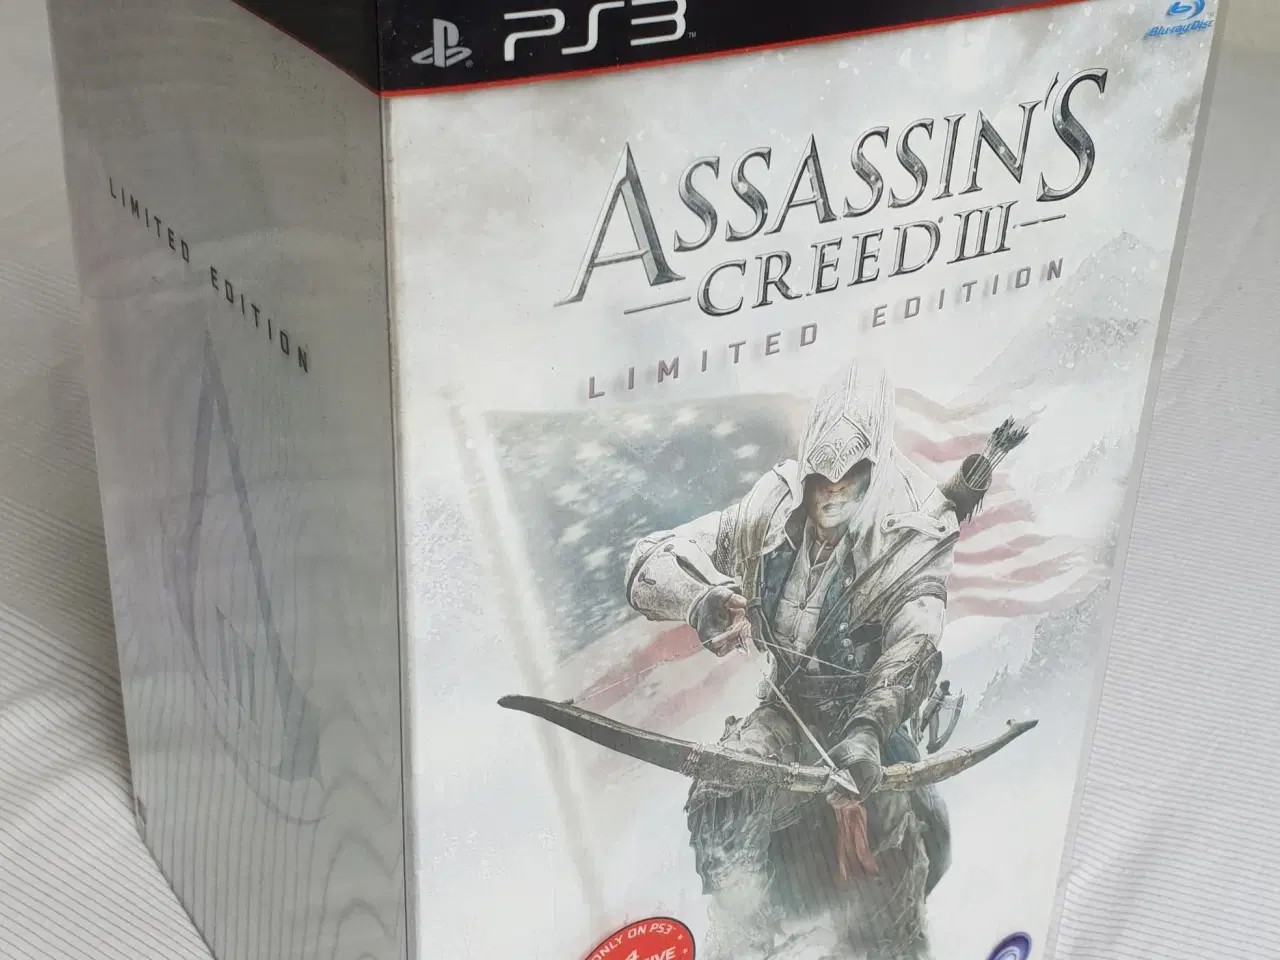 Billede 1 - Assassin's Creed 3 Limited edition (PS3 NTSC-US)